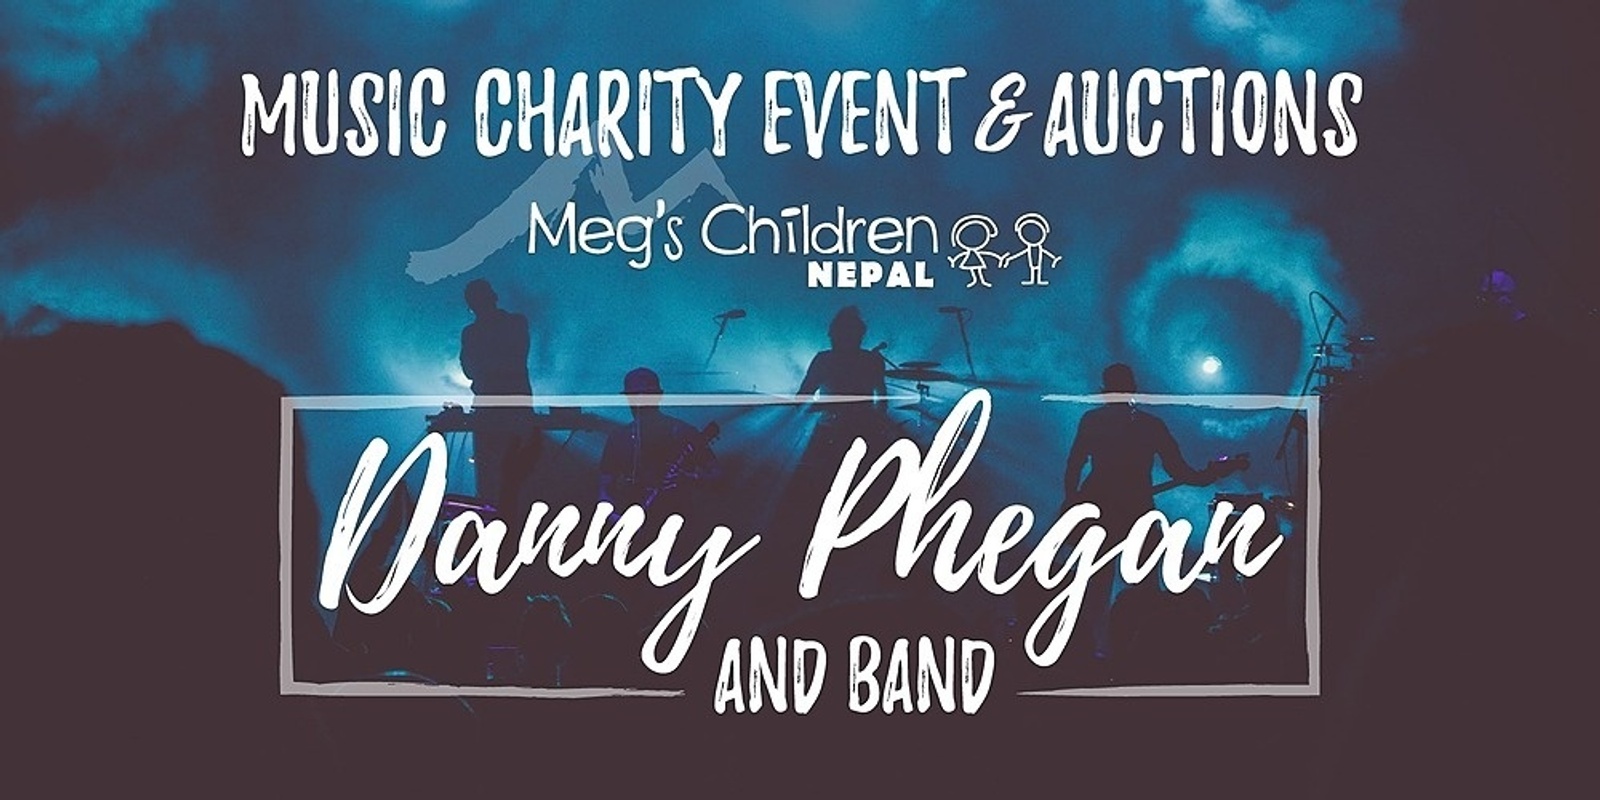 Banner image for Danny Phegan & Band charity evening 